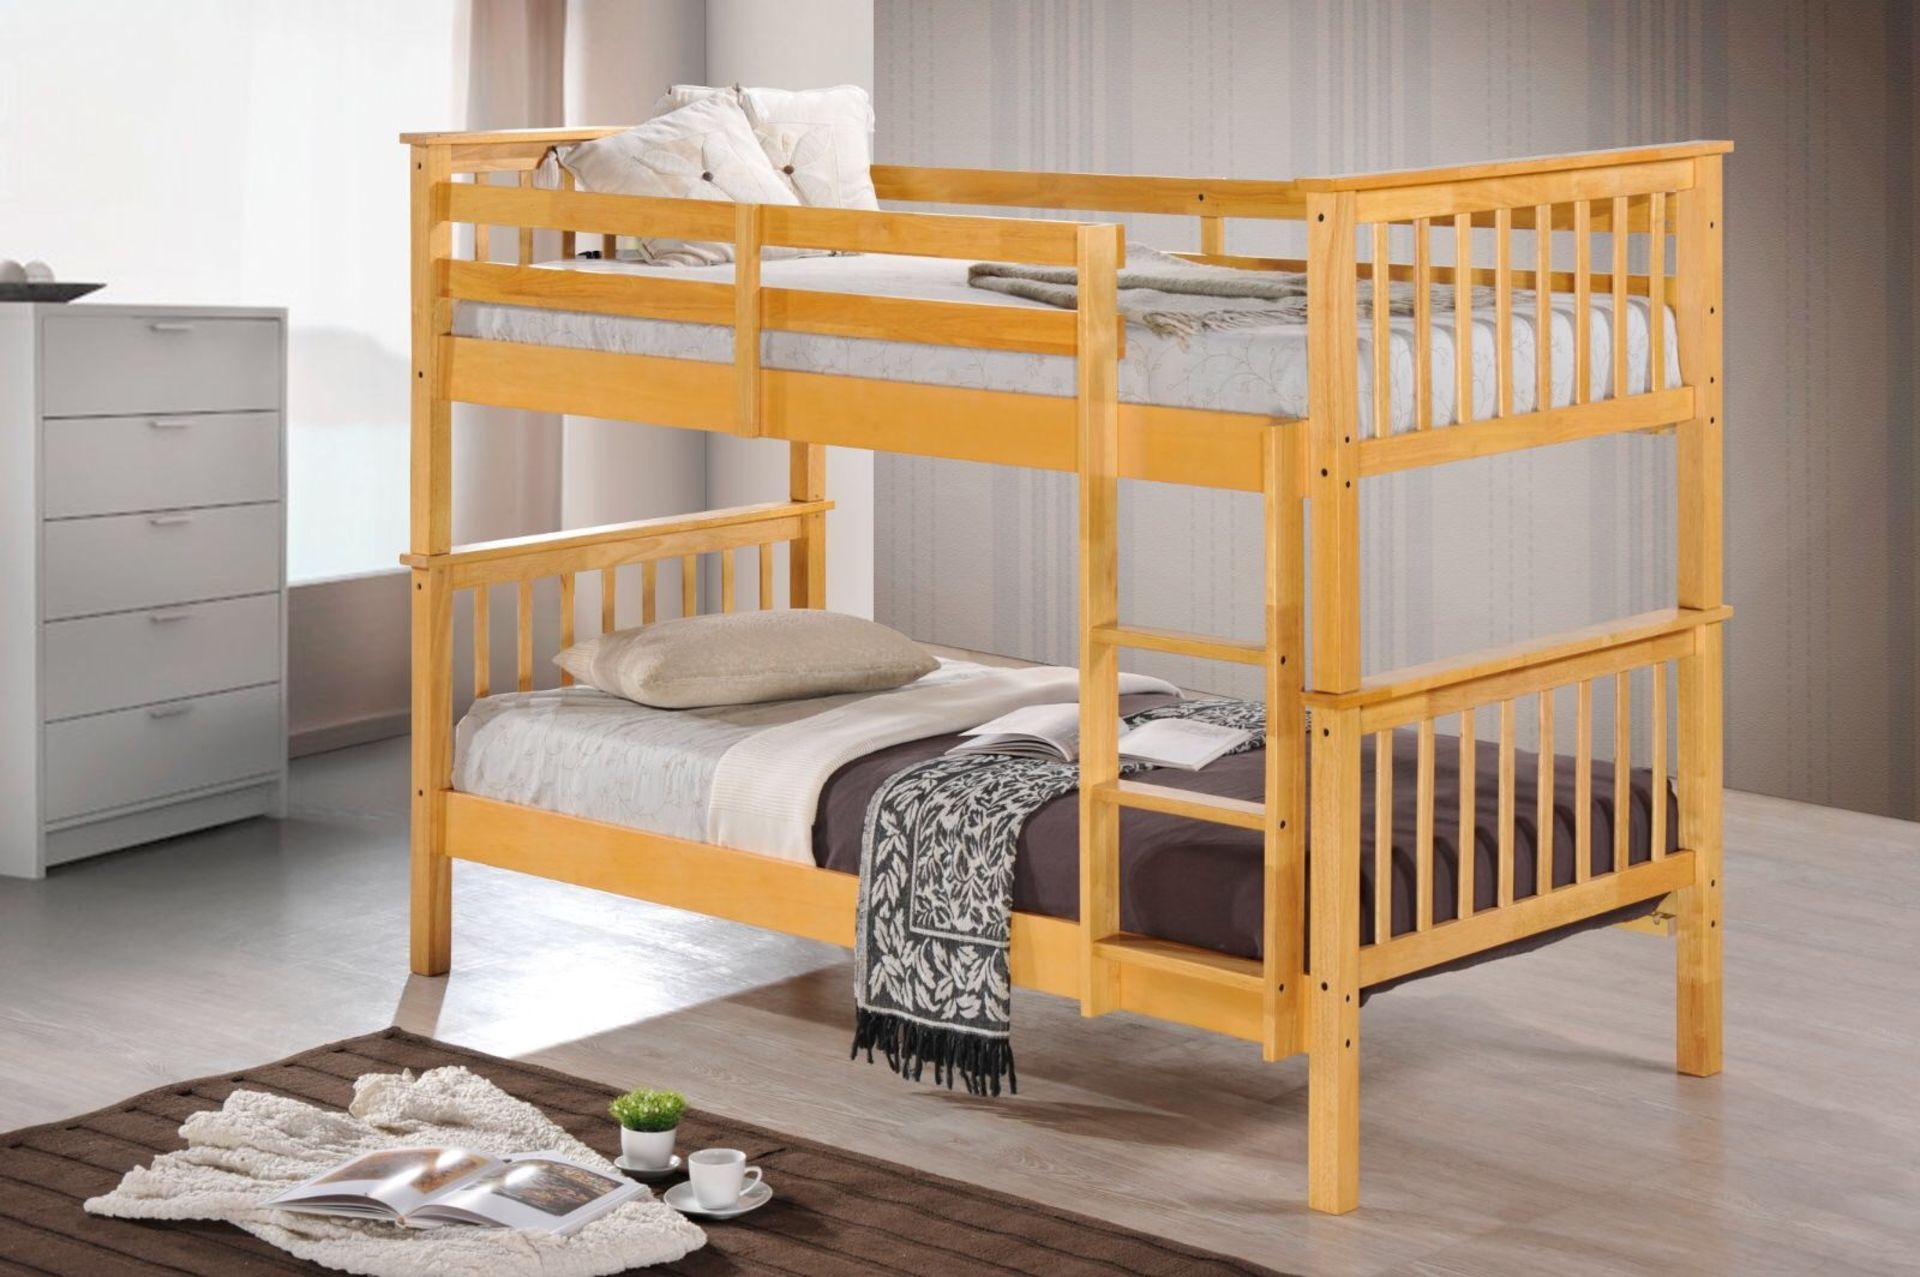 1 BRAND NEW BOXED BEECH COLOURED SOLID WOOD BUNK BED